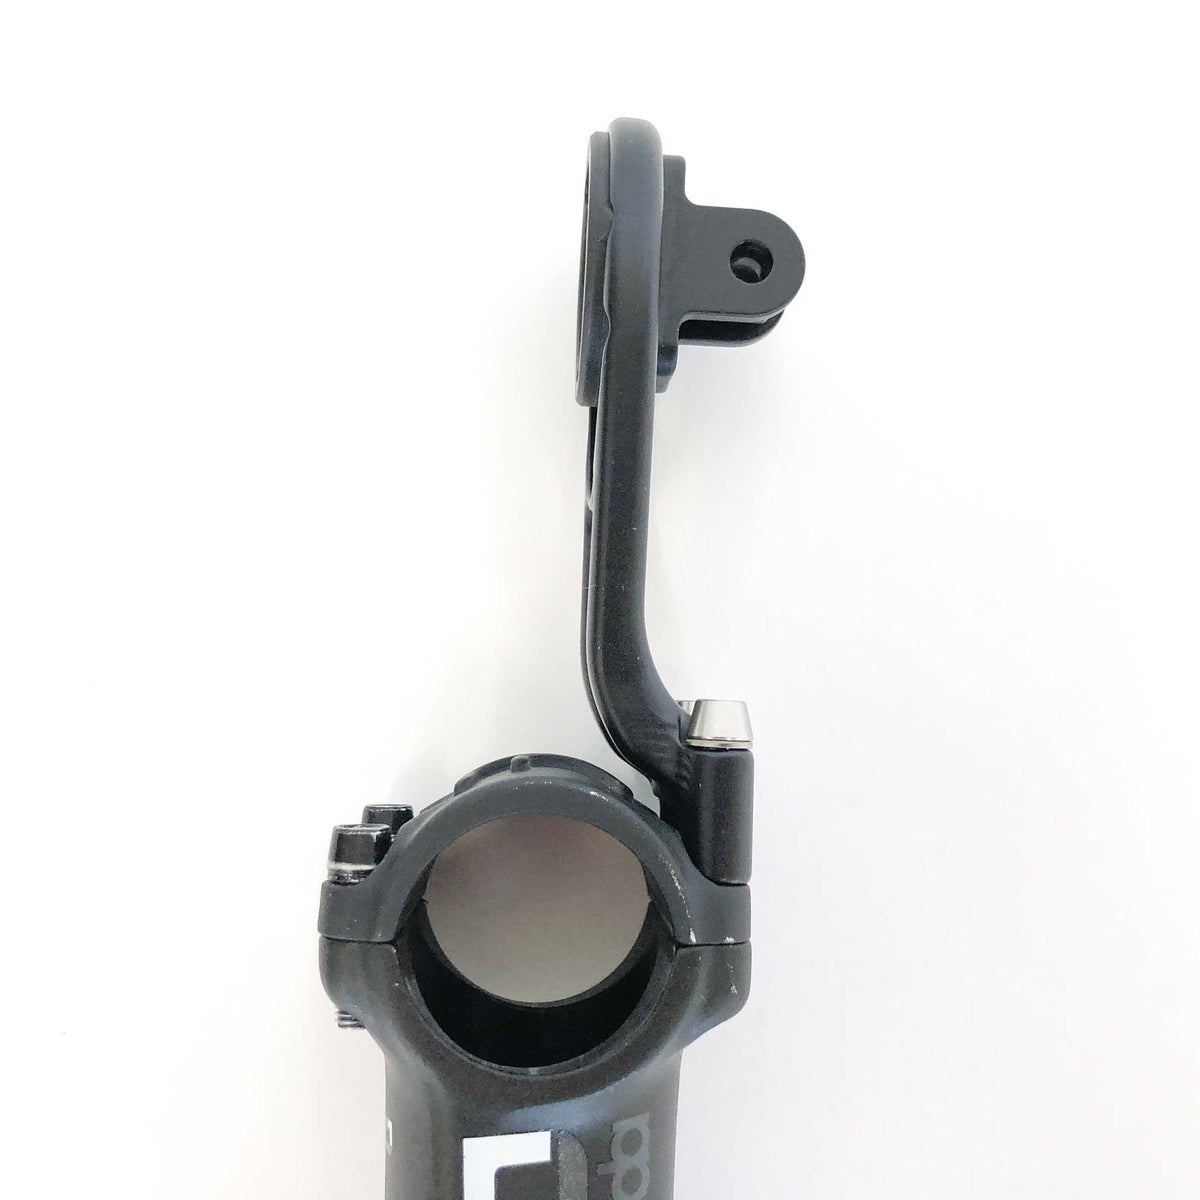 Most iTiger Stem Plate Computer mount combo